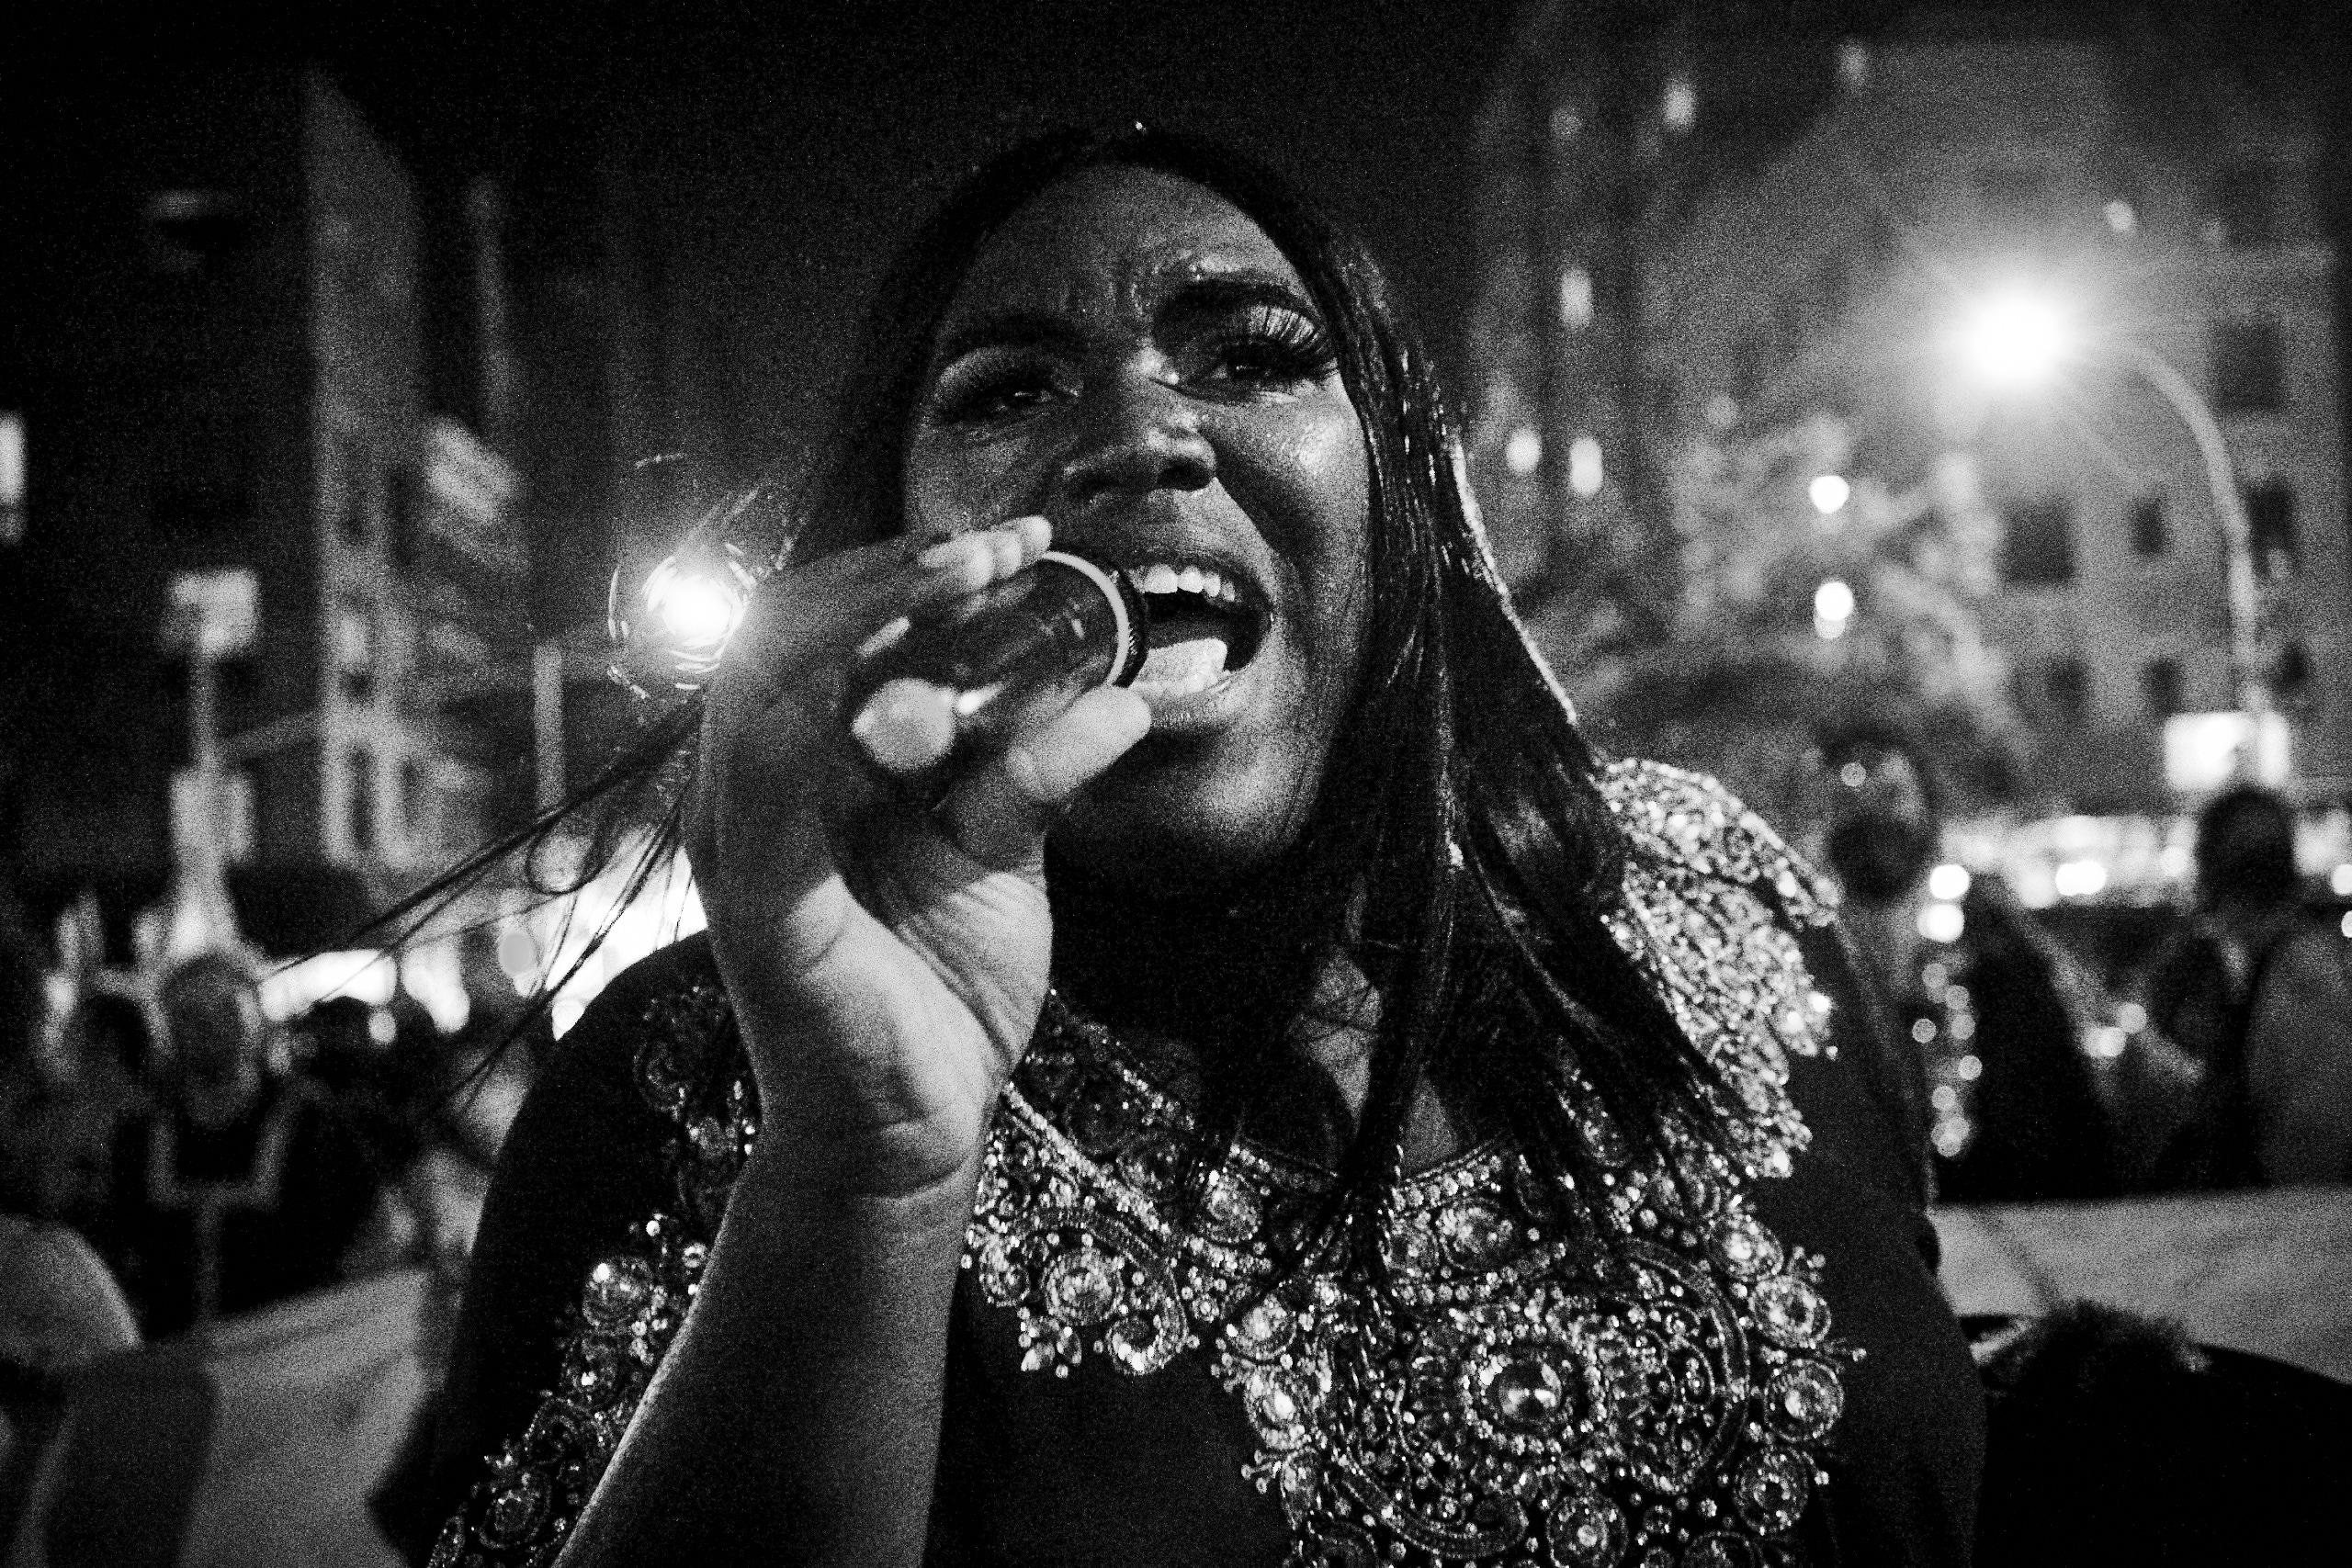 20201015-1_NYC_Protests_Stonewall_03_0714_SeanWaltrous